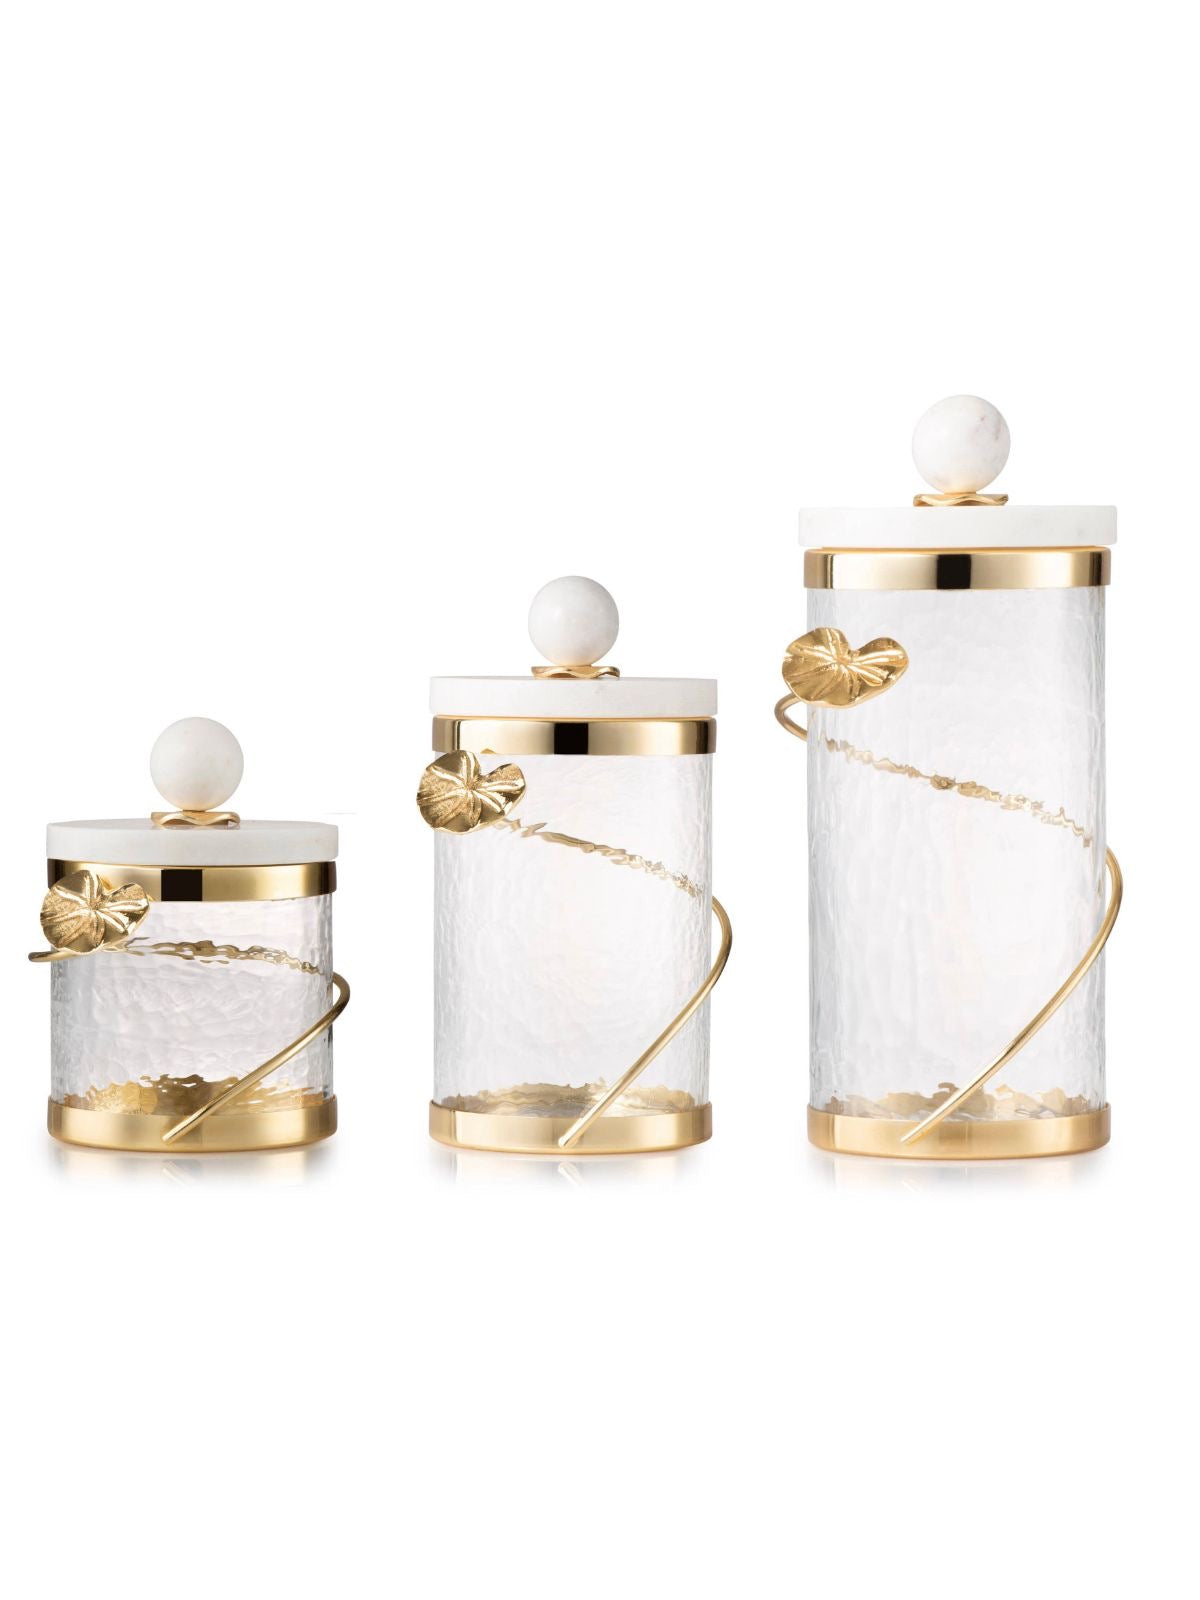 The Cuore D’ Oro Glass Canister Has A Gold Leaf Design & Marble Lid Available in 3 Sizes From KYA Home Decor